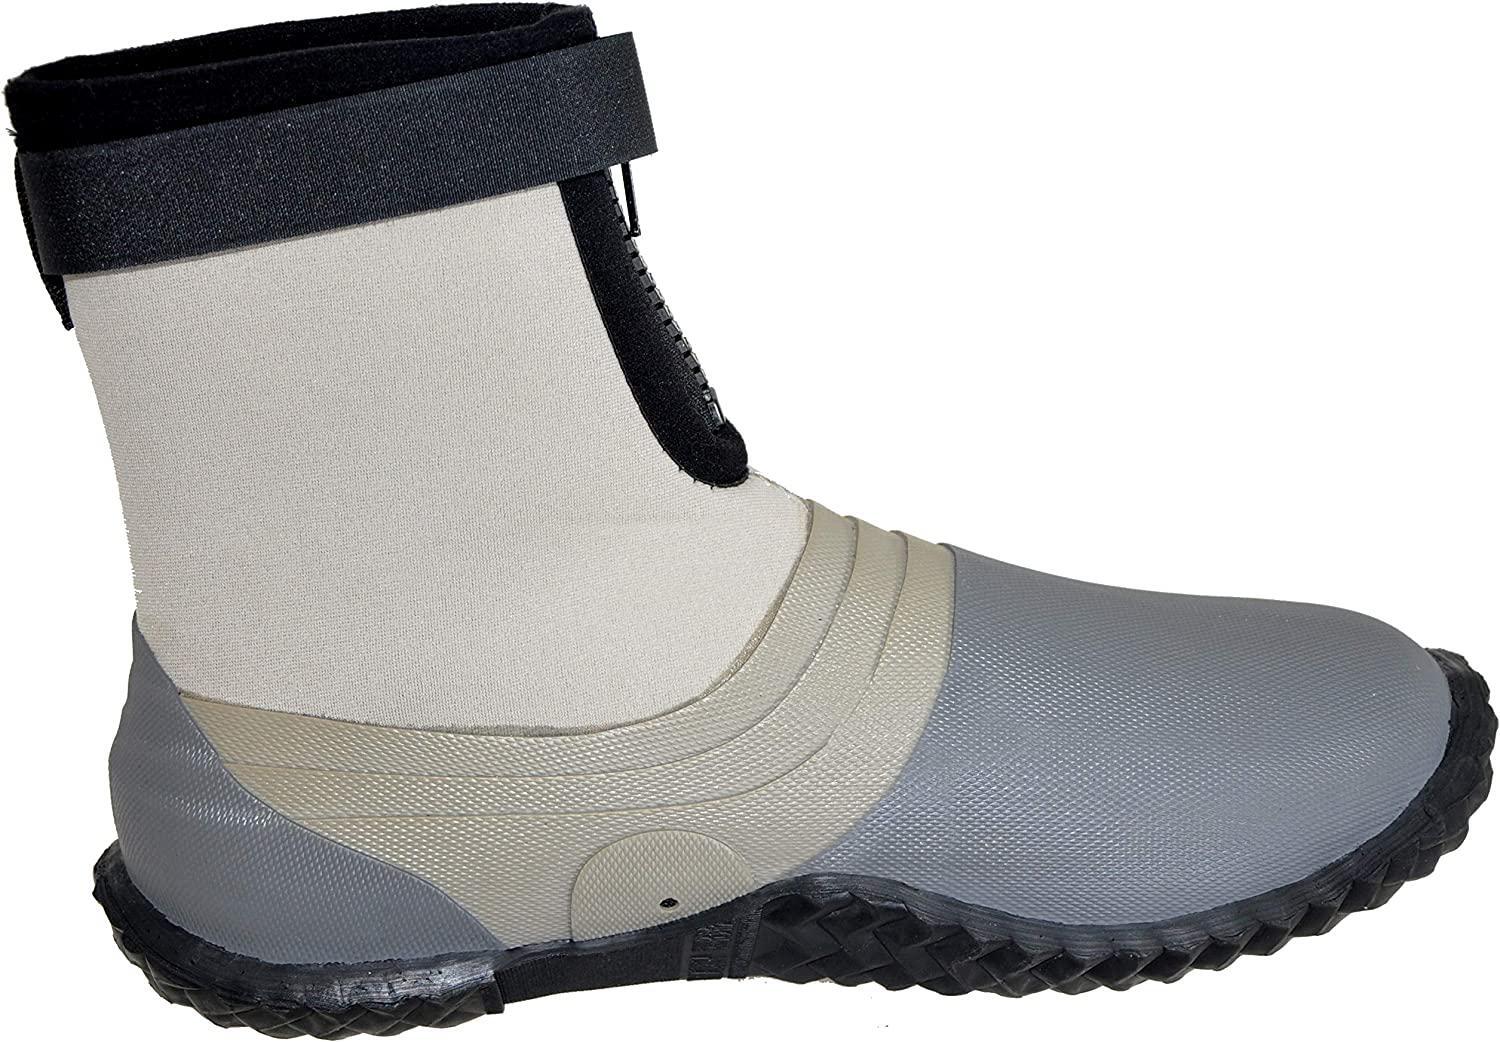 Foreverlast Inc. Ray-Guard Reef Wading & Fishing Boots Generation